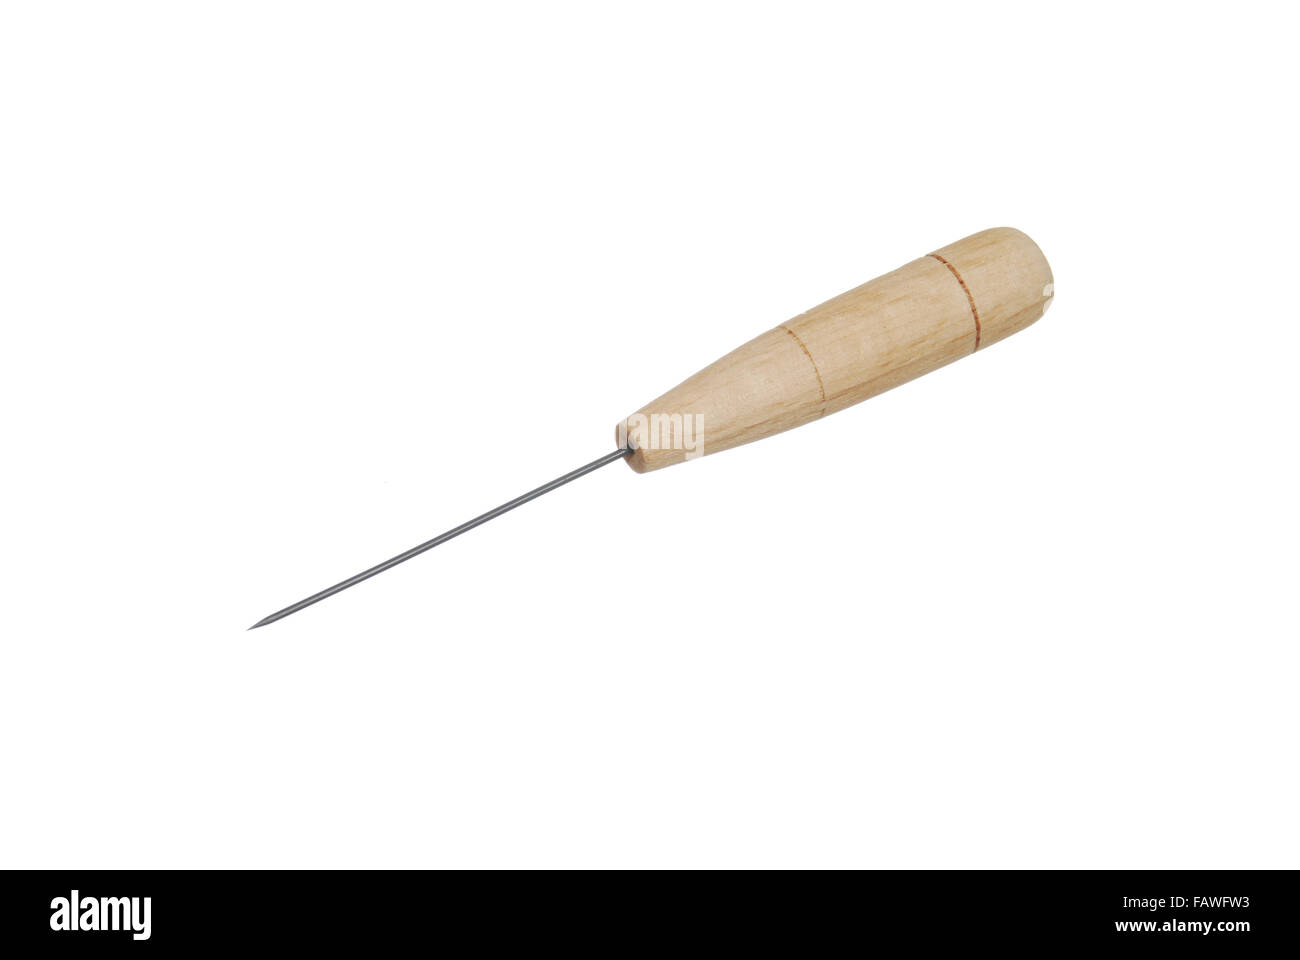 awl with wooden handle on a white background Stock Photo